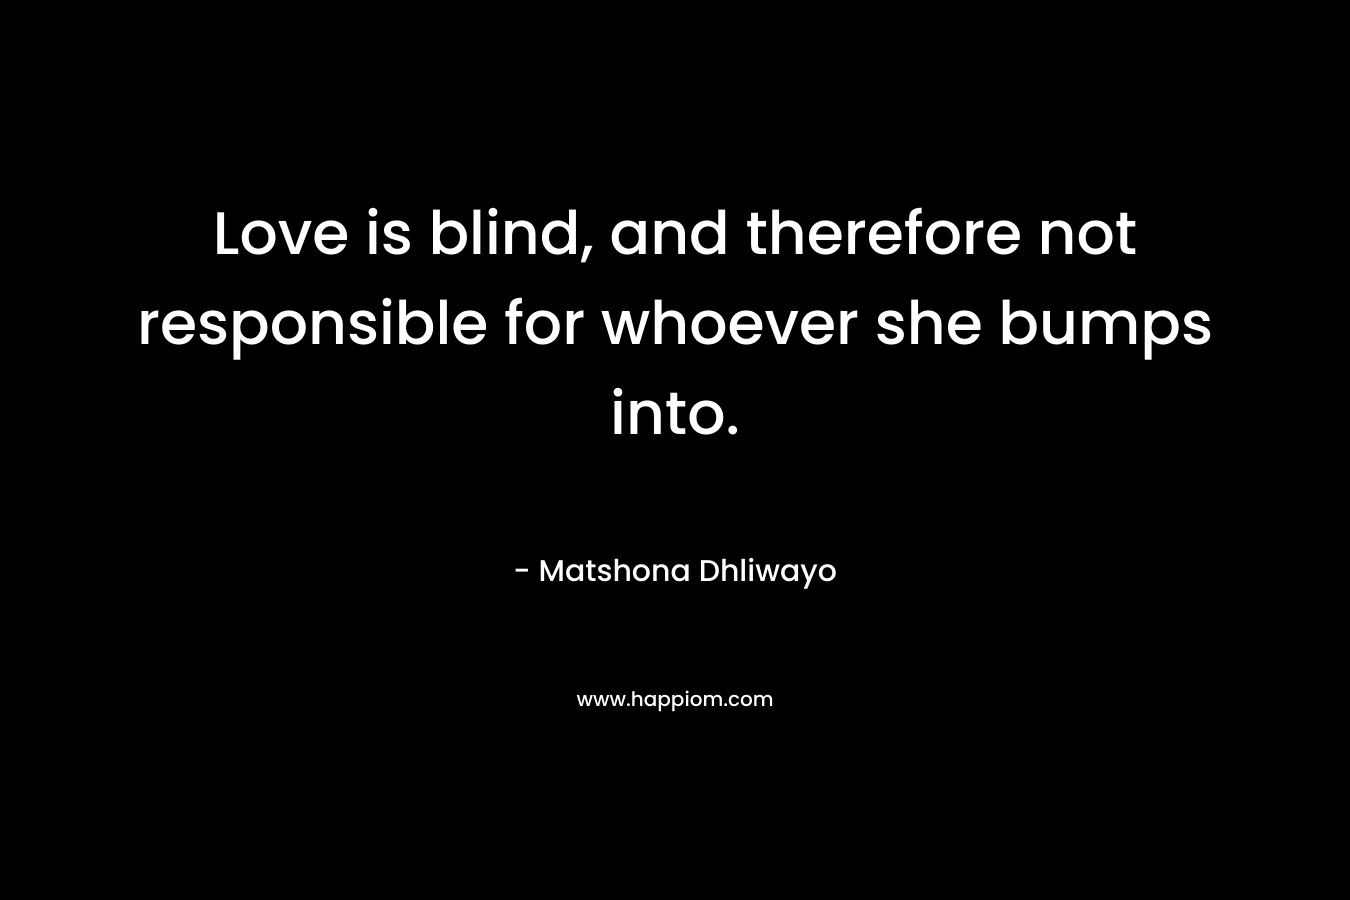 Love is blind, and therefore not responsible for whoever she bumps into. – Matshona Dhliwayo